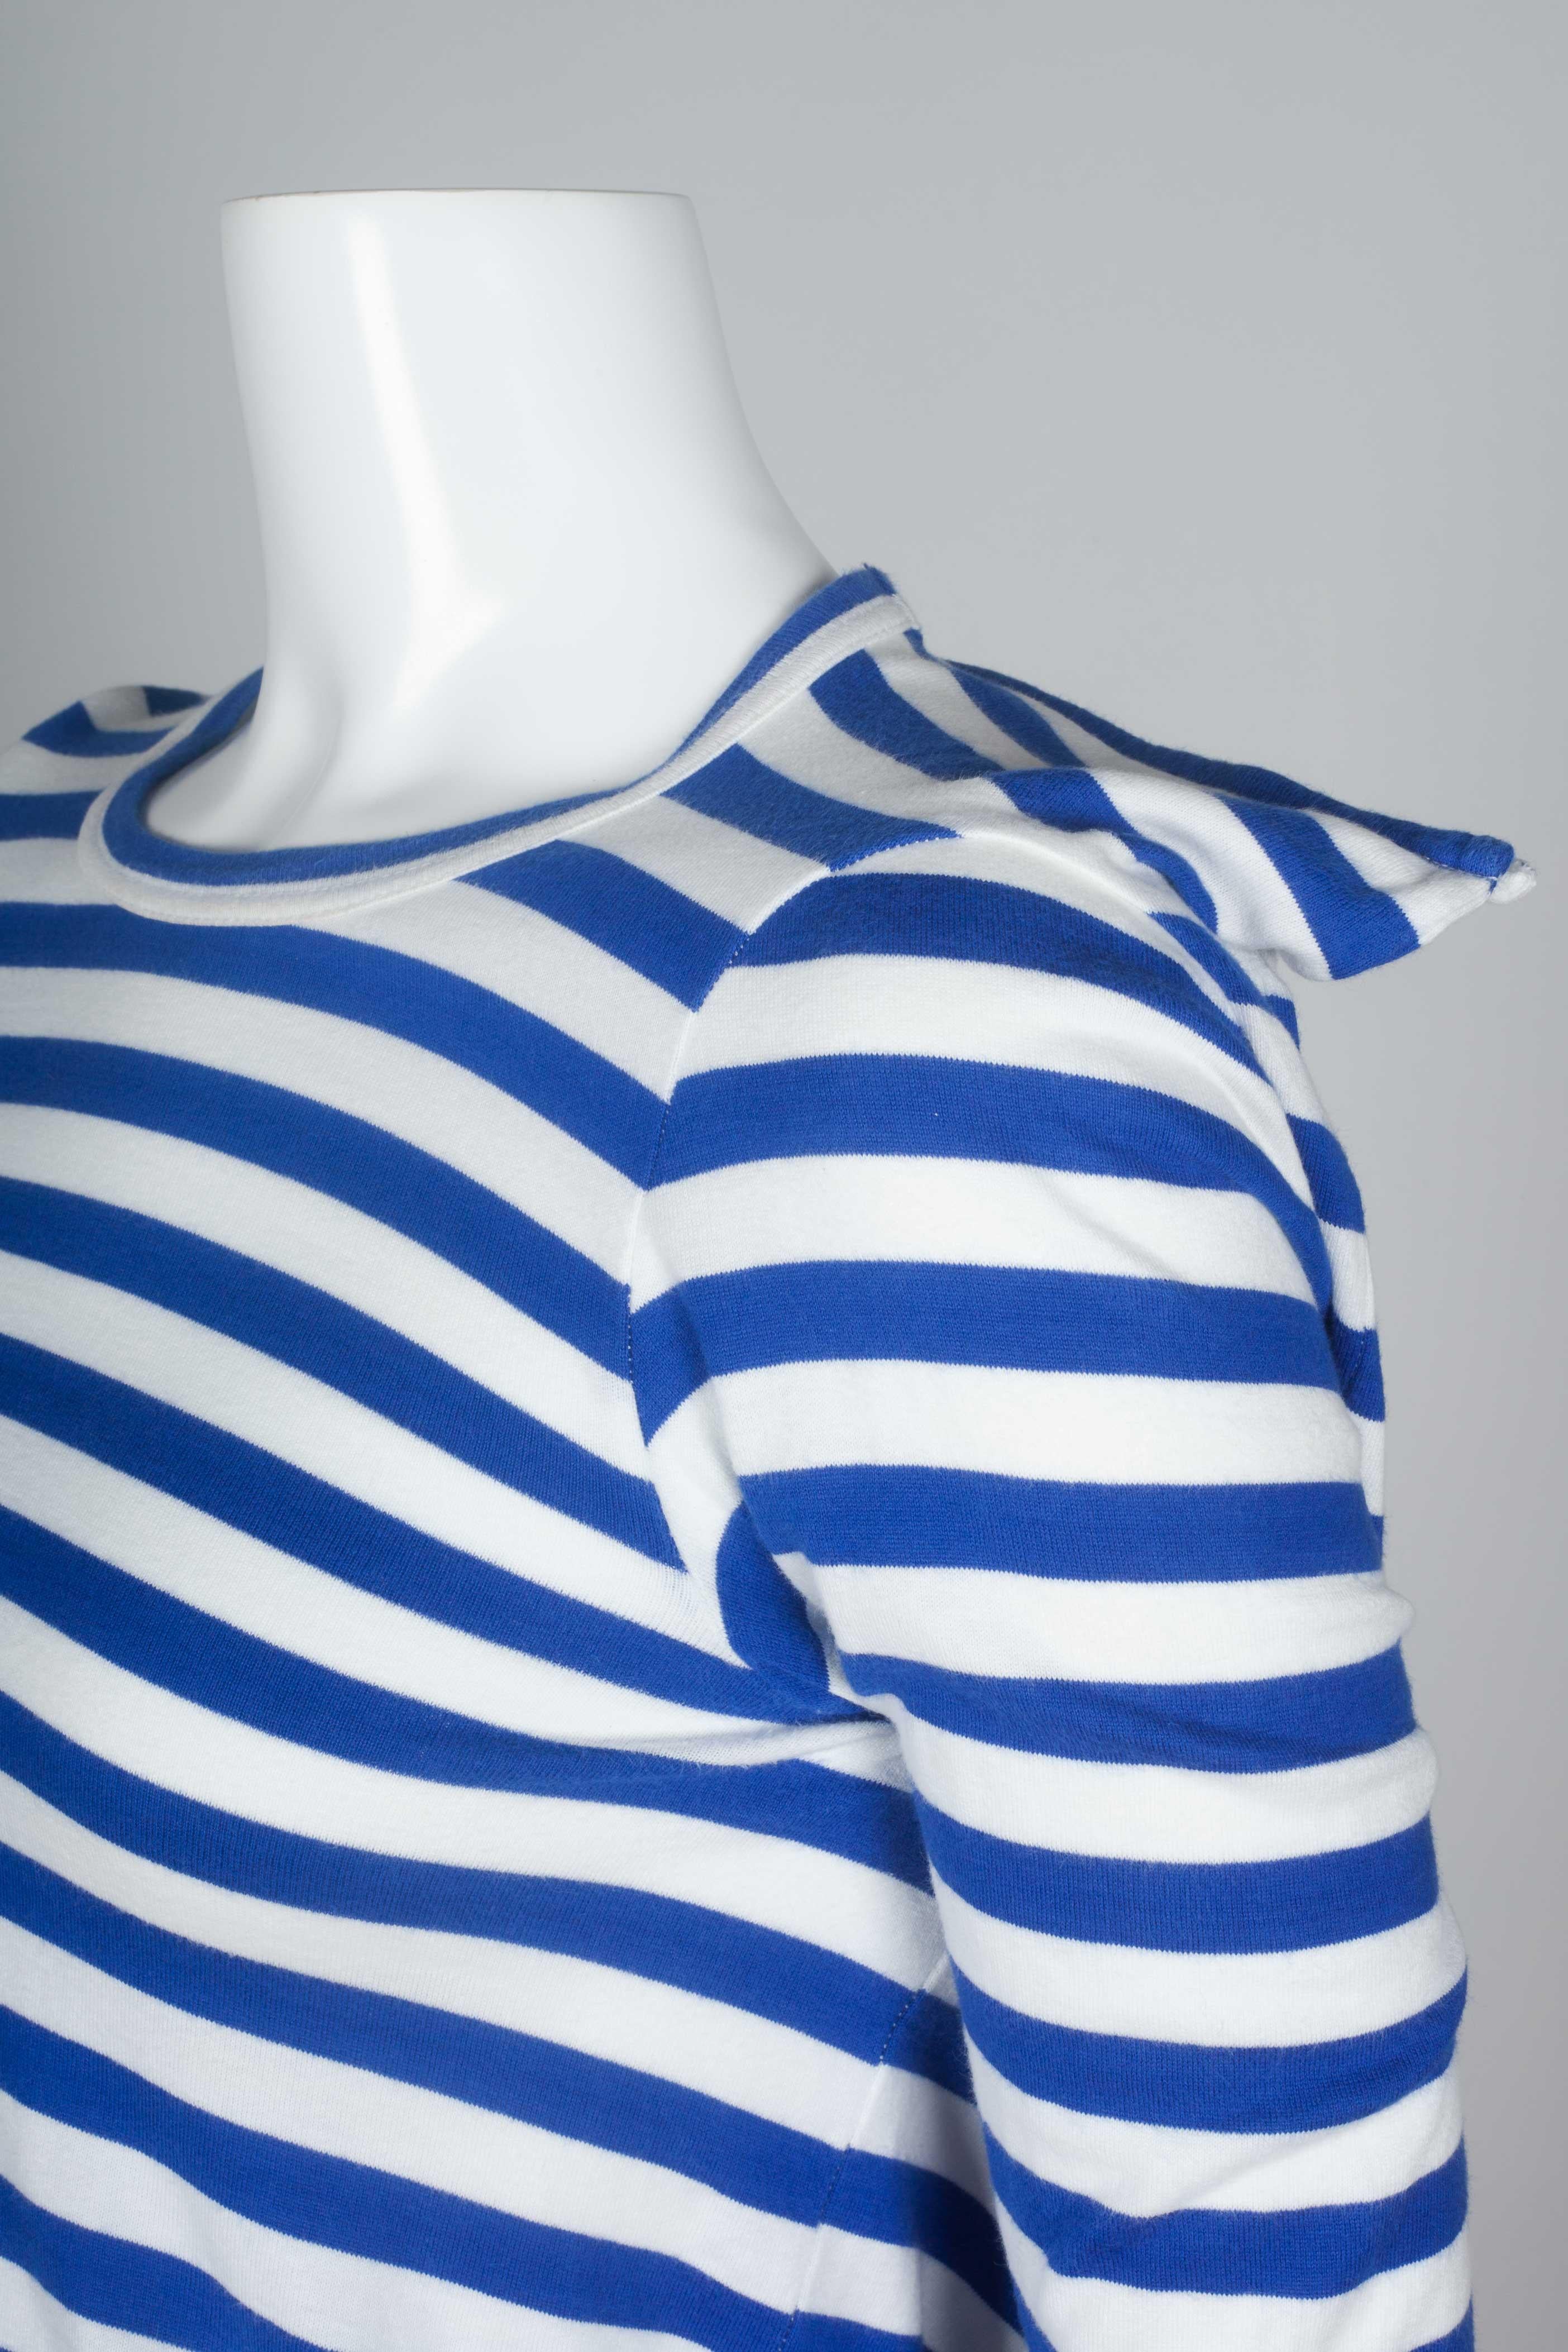 Comme des Garçons 2007 long sleeve blue nautical striped shirt cut from a square pattern, revealing two of its corners at the shoulders. French marinière stripes, Jean-Paul Gaultier style. 

YEAR: 2007
MARKED SIZE: 
FIT: Regular 
US WOMEN'S: XS
US